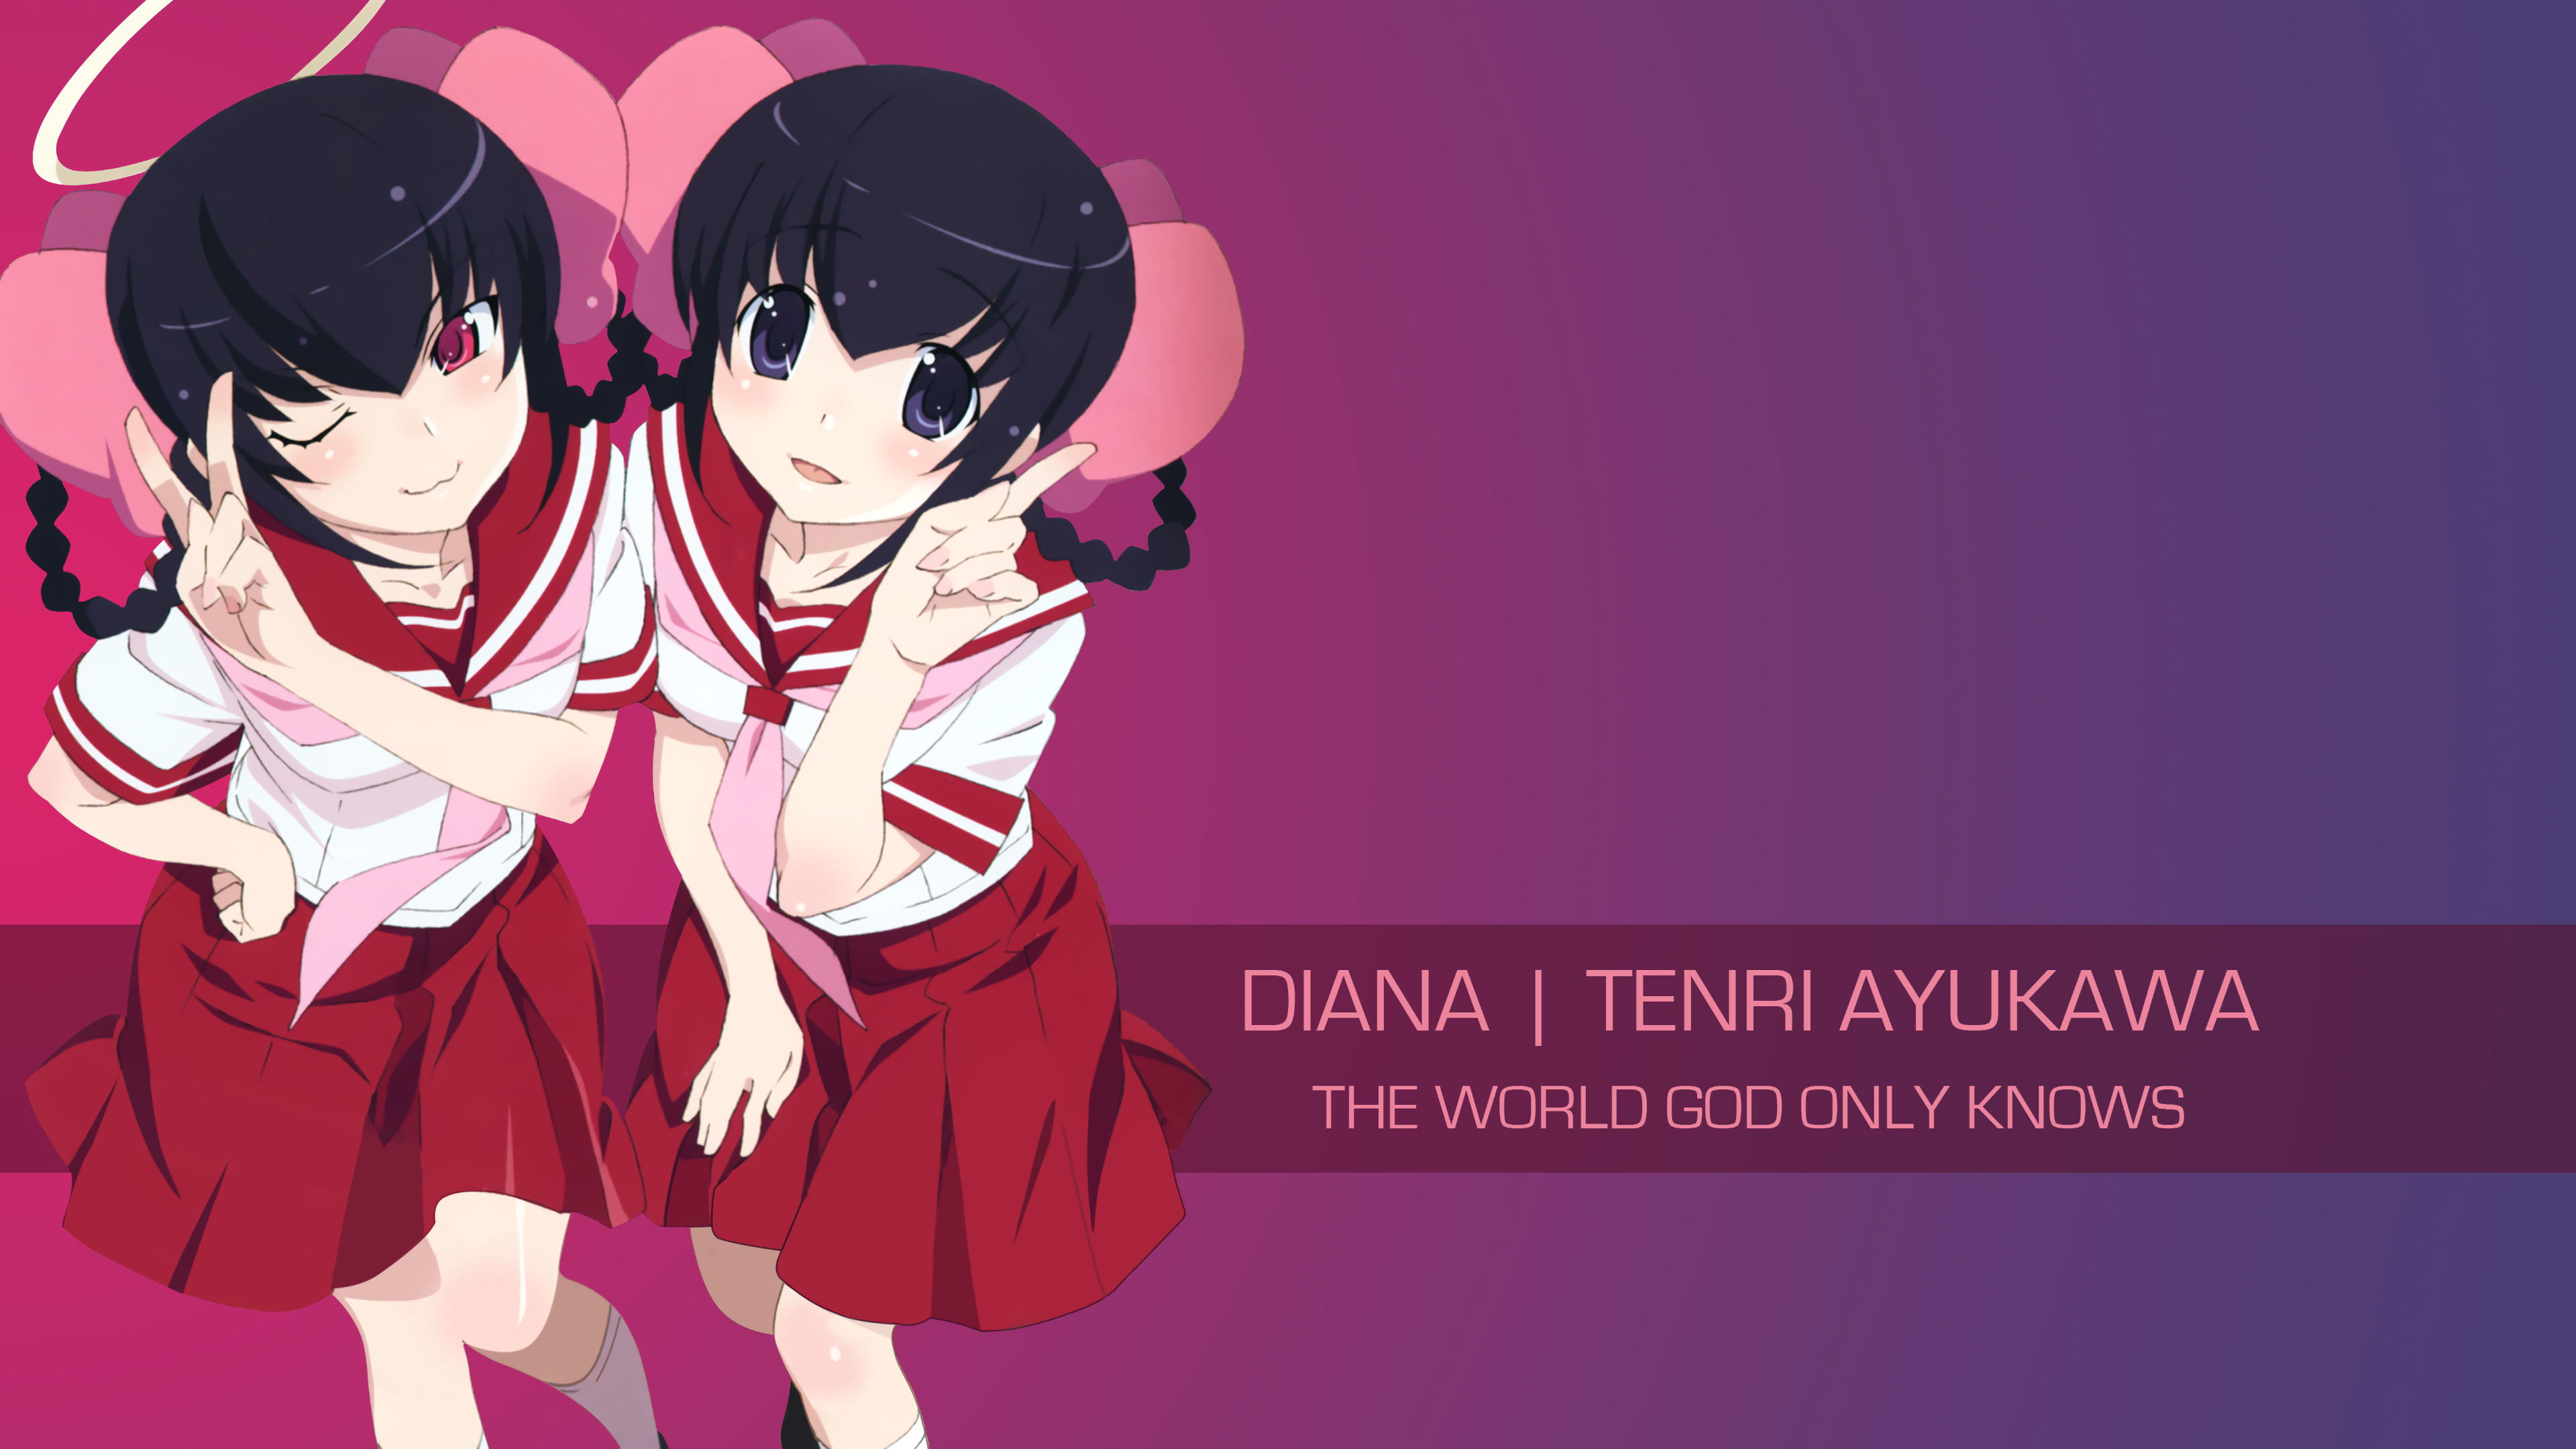 The World God Only Knows Anime Girls Diana 3840x2160